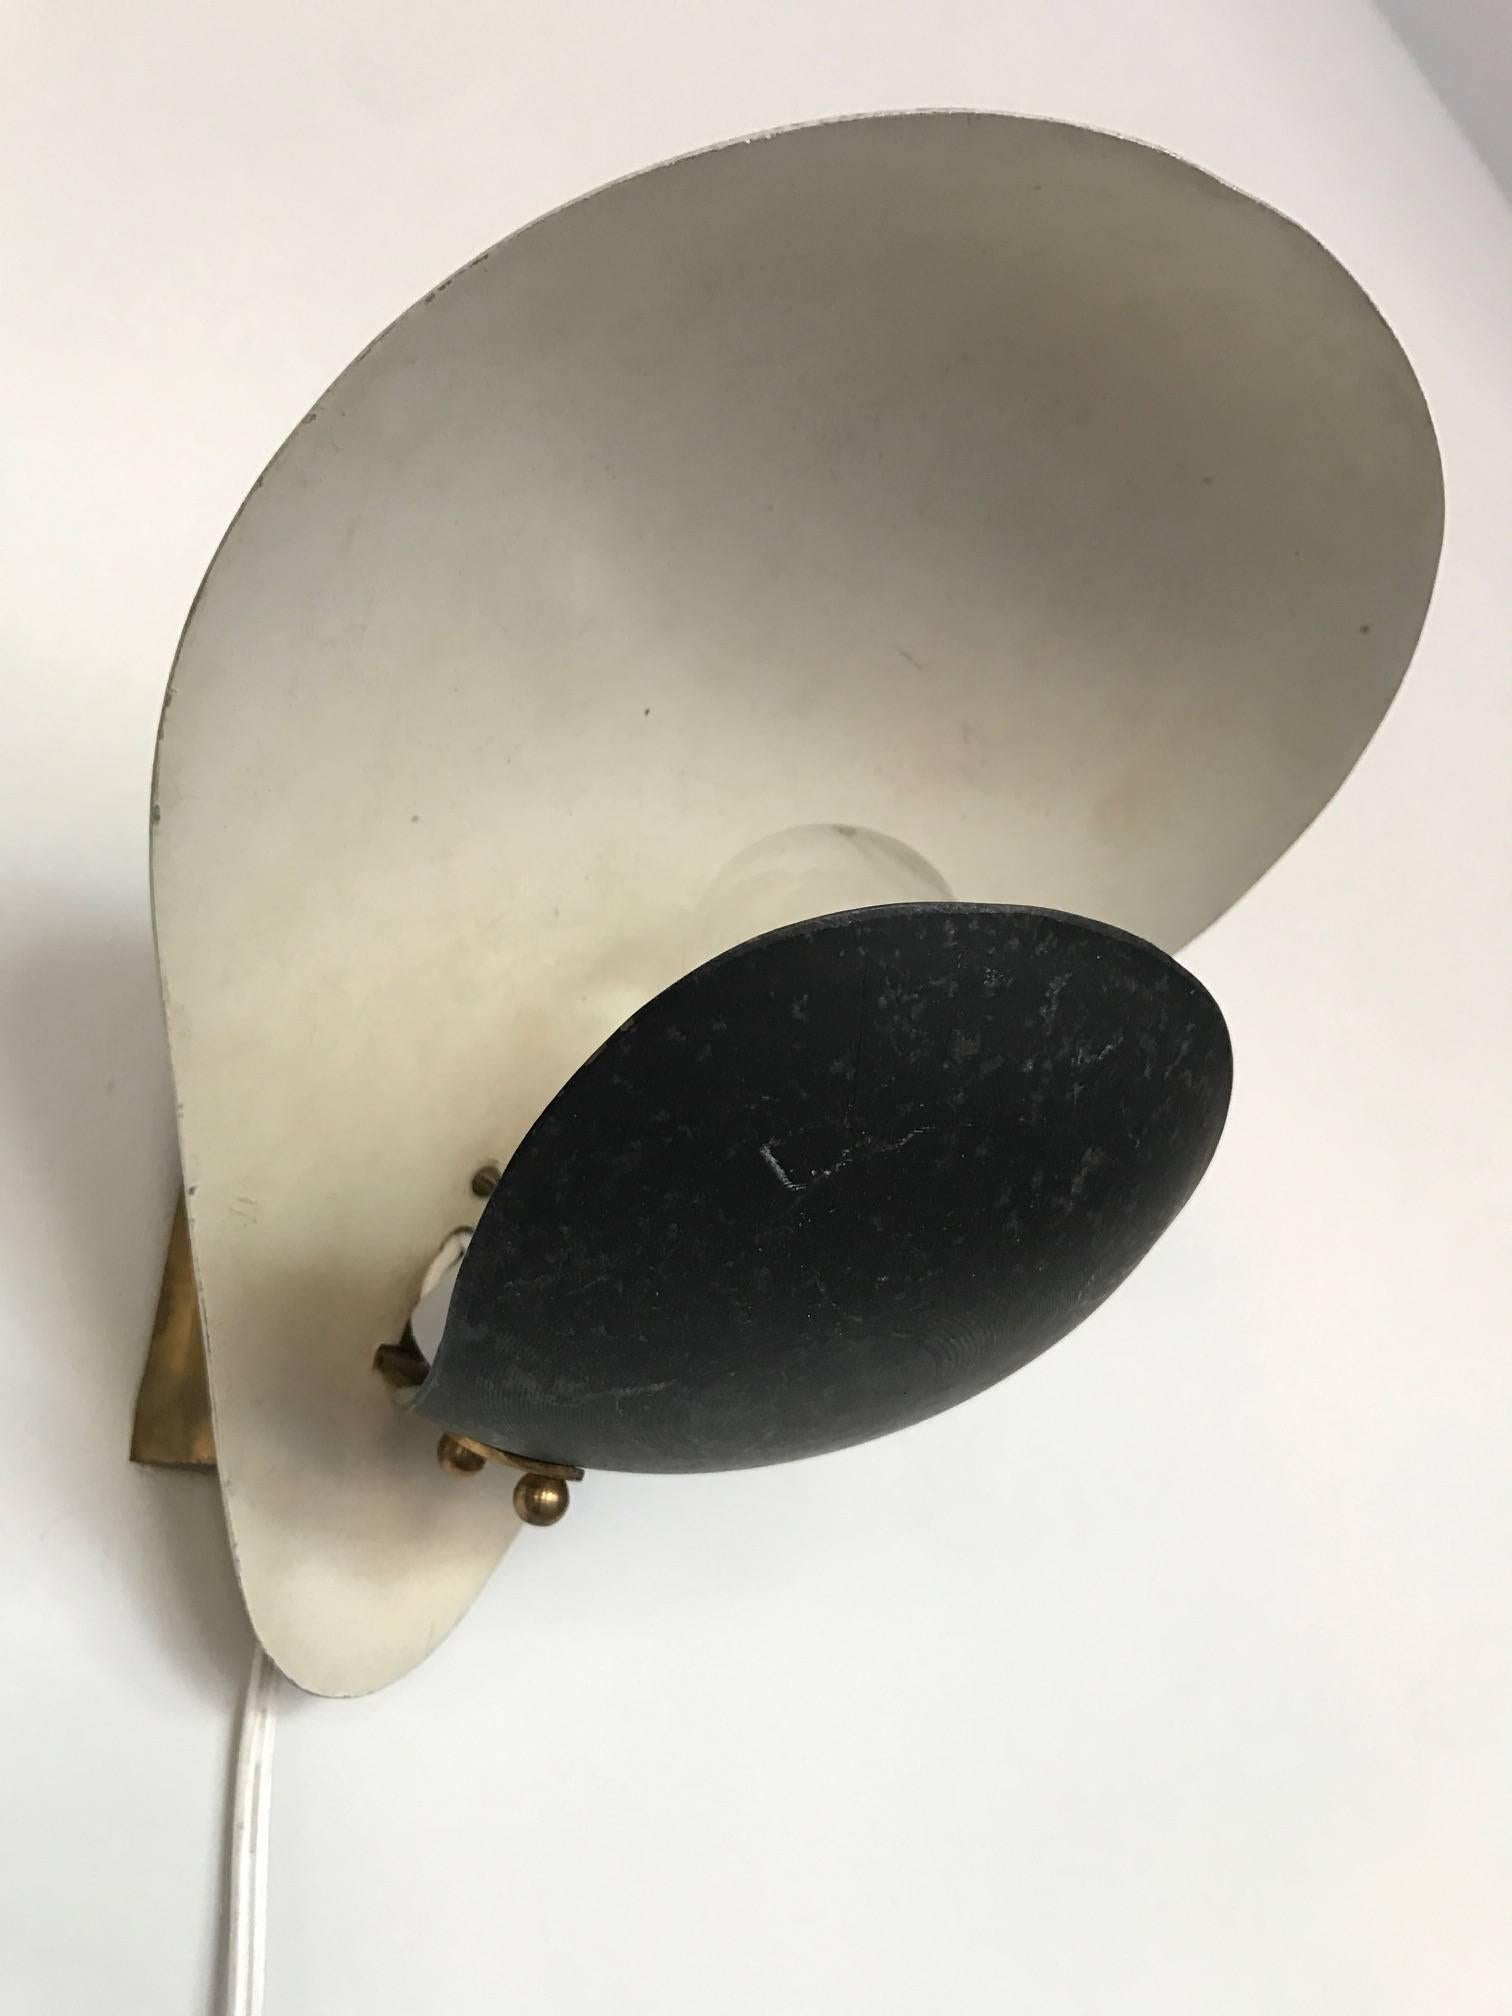 A pair of modernist Italian sconces (appliques). Unusual black and white shapes that pivot, allowing for lights to be hung in many ways. And angle out or towards the wall. Original paint. Brass fittings.